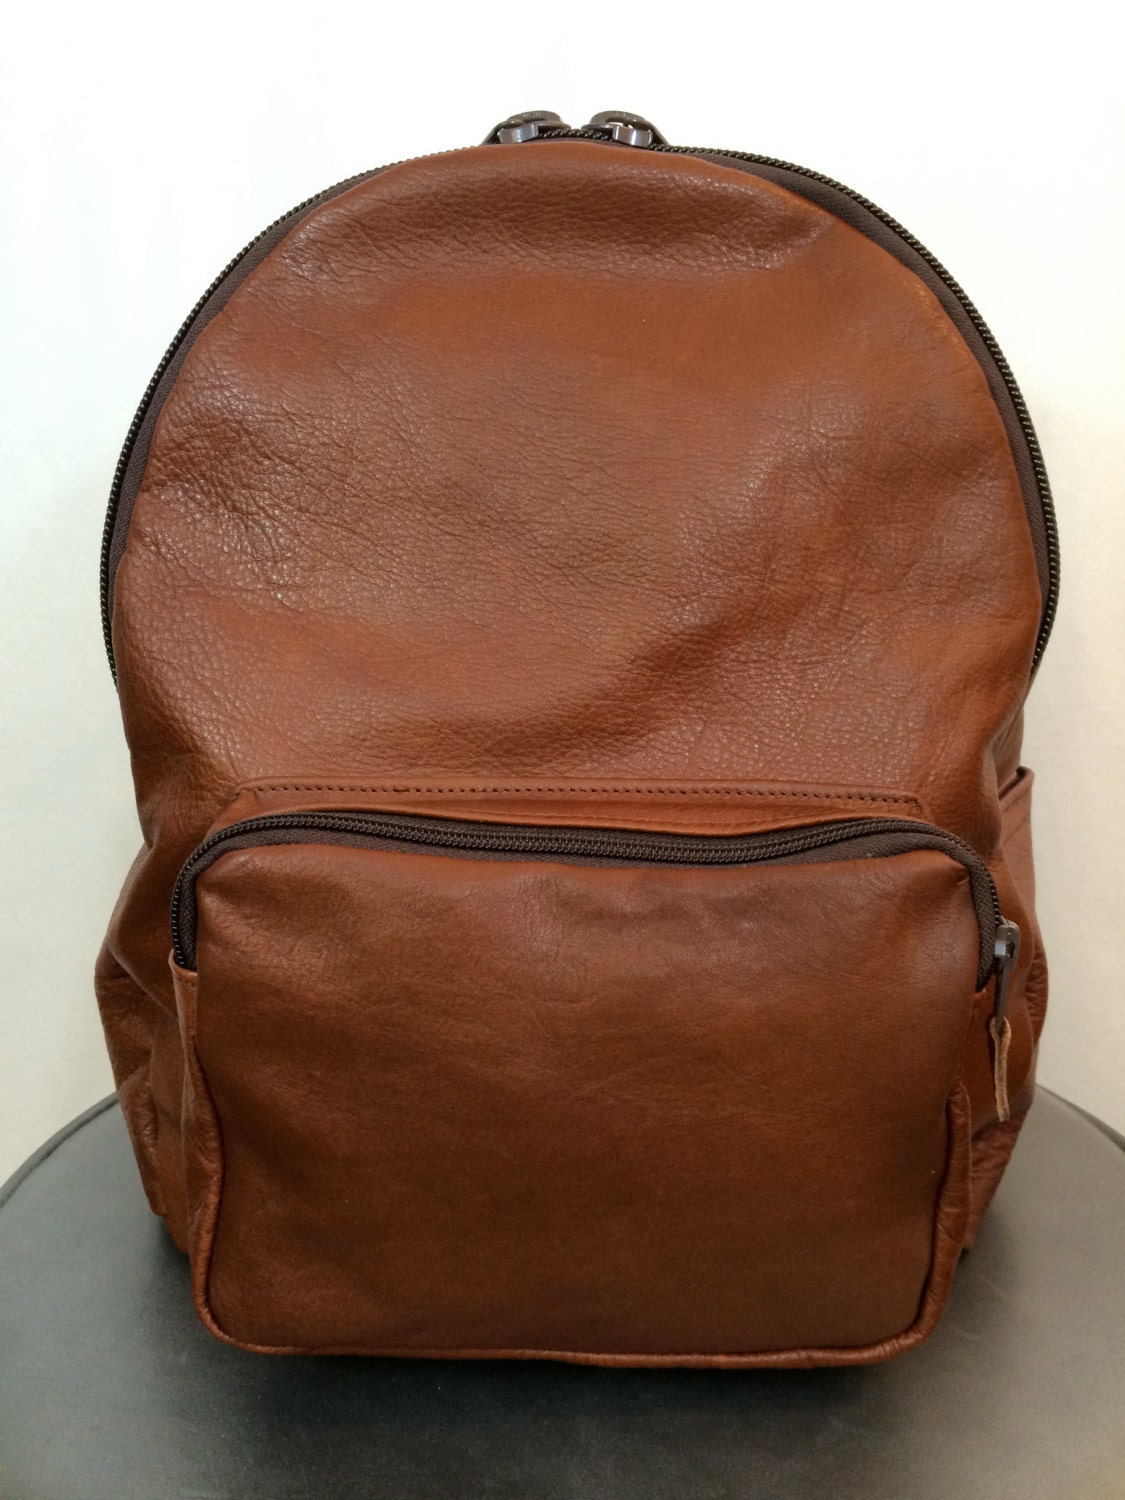 The Day-Pack Handmade Leather Zip Backpack